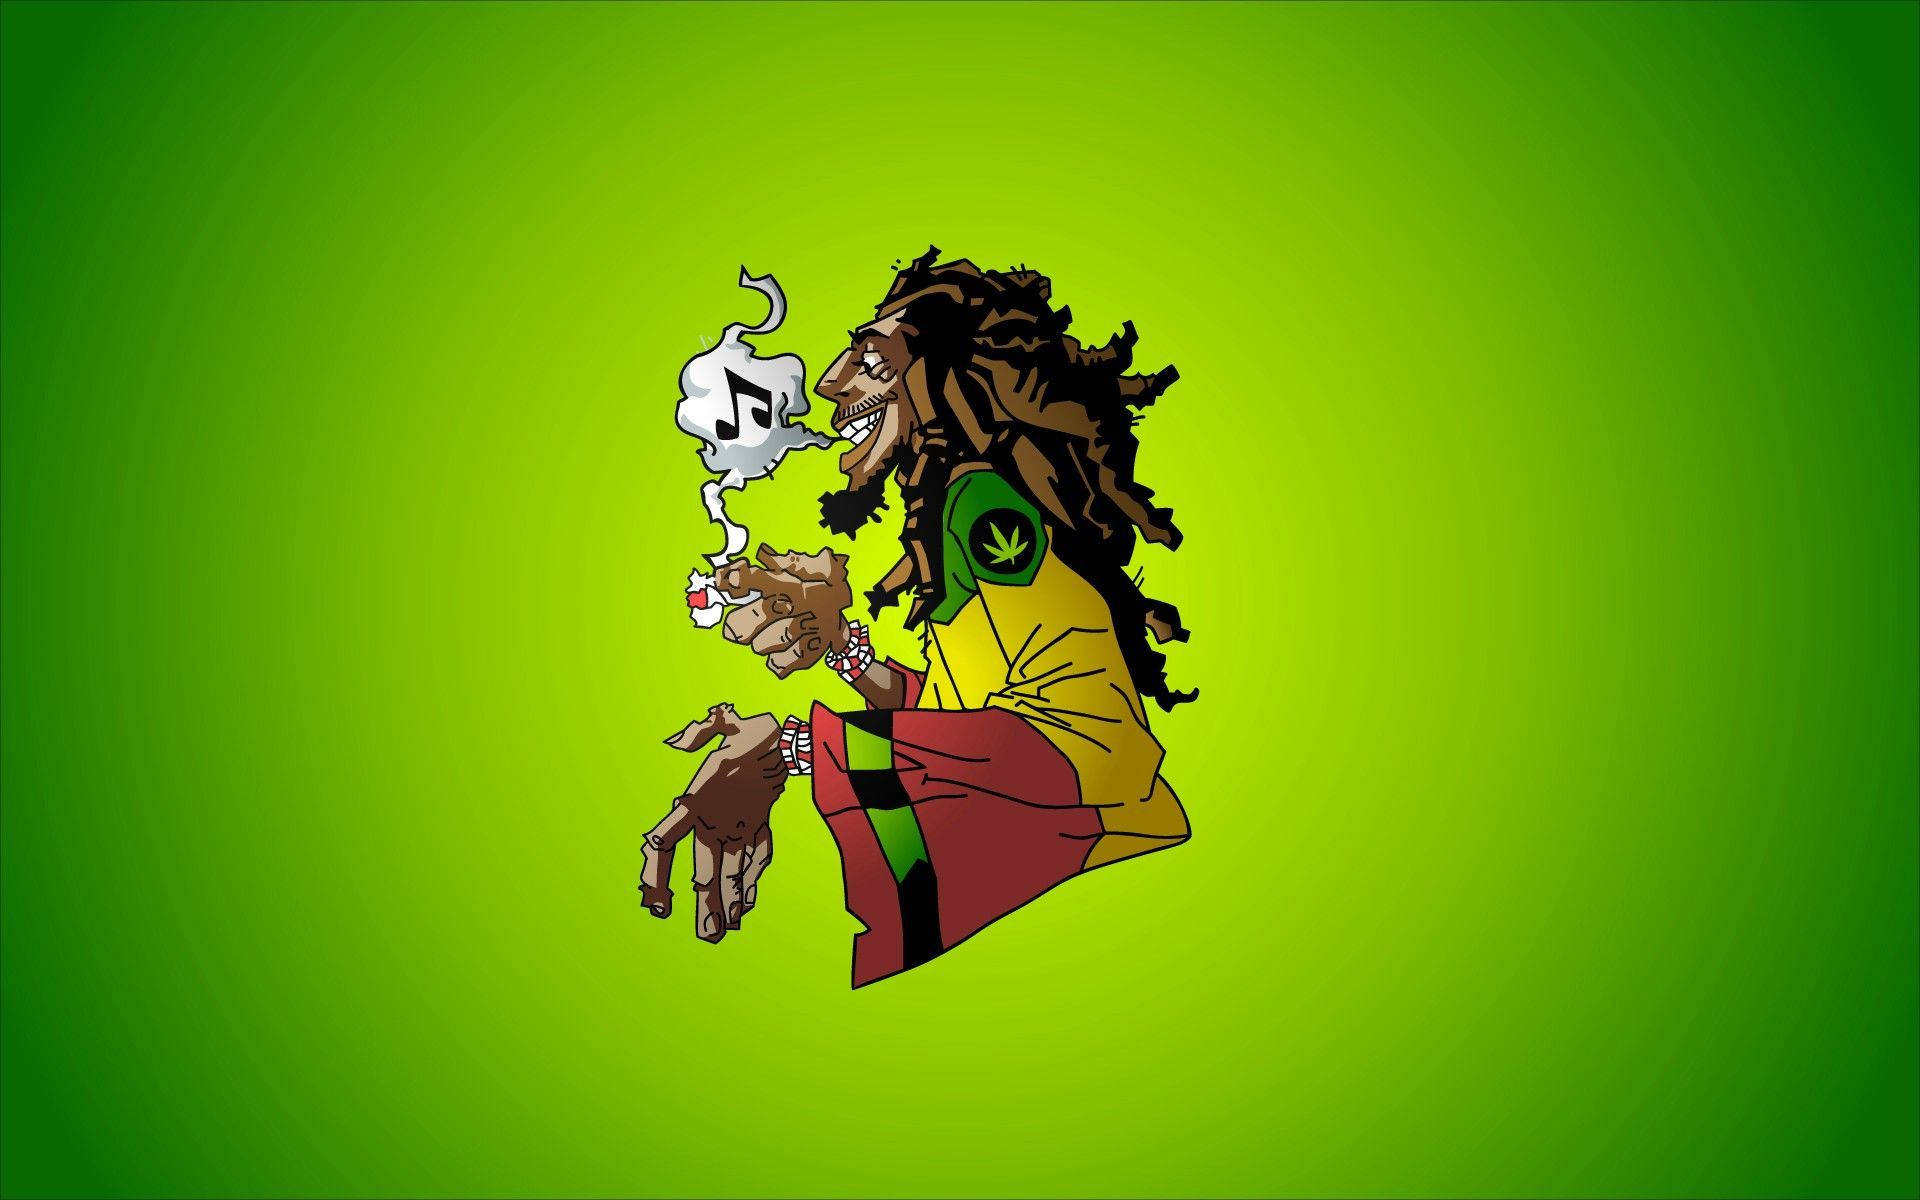 Free Cartoon Weed Pictures , [100+] Cartoon Weed Pictures for FREE |  